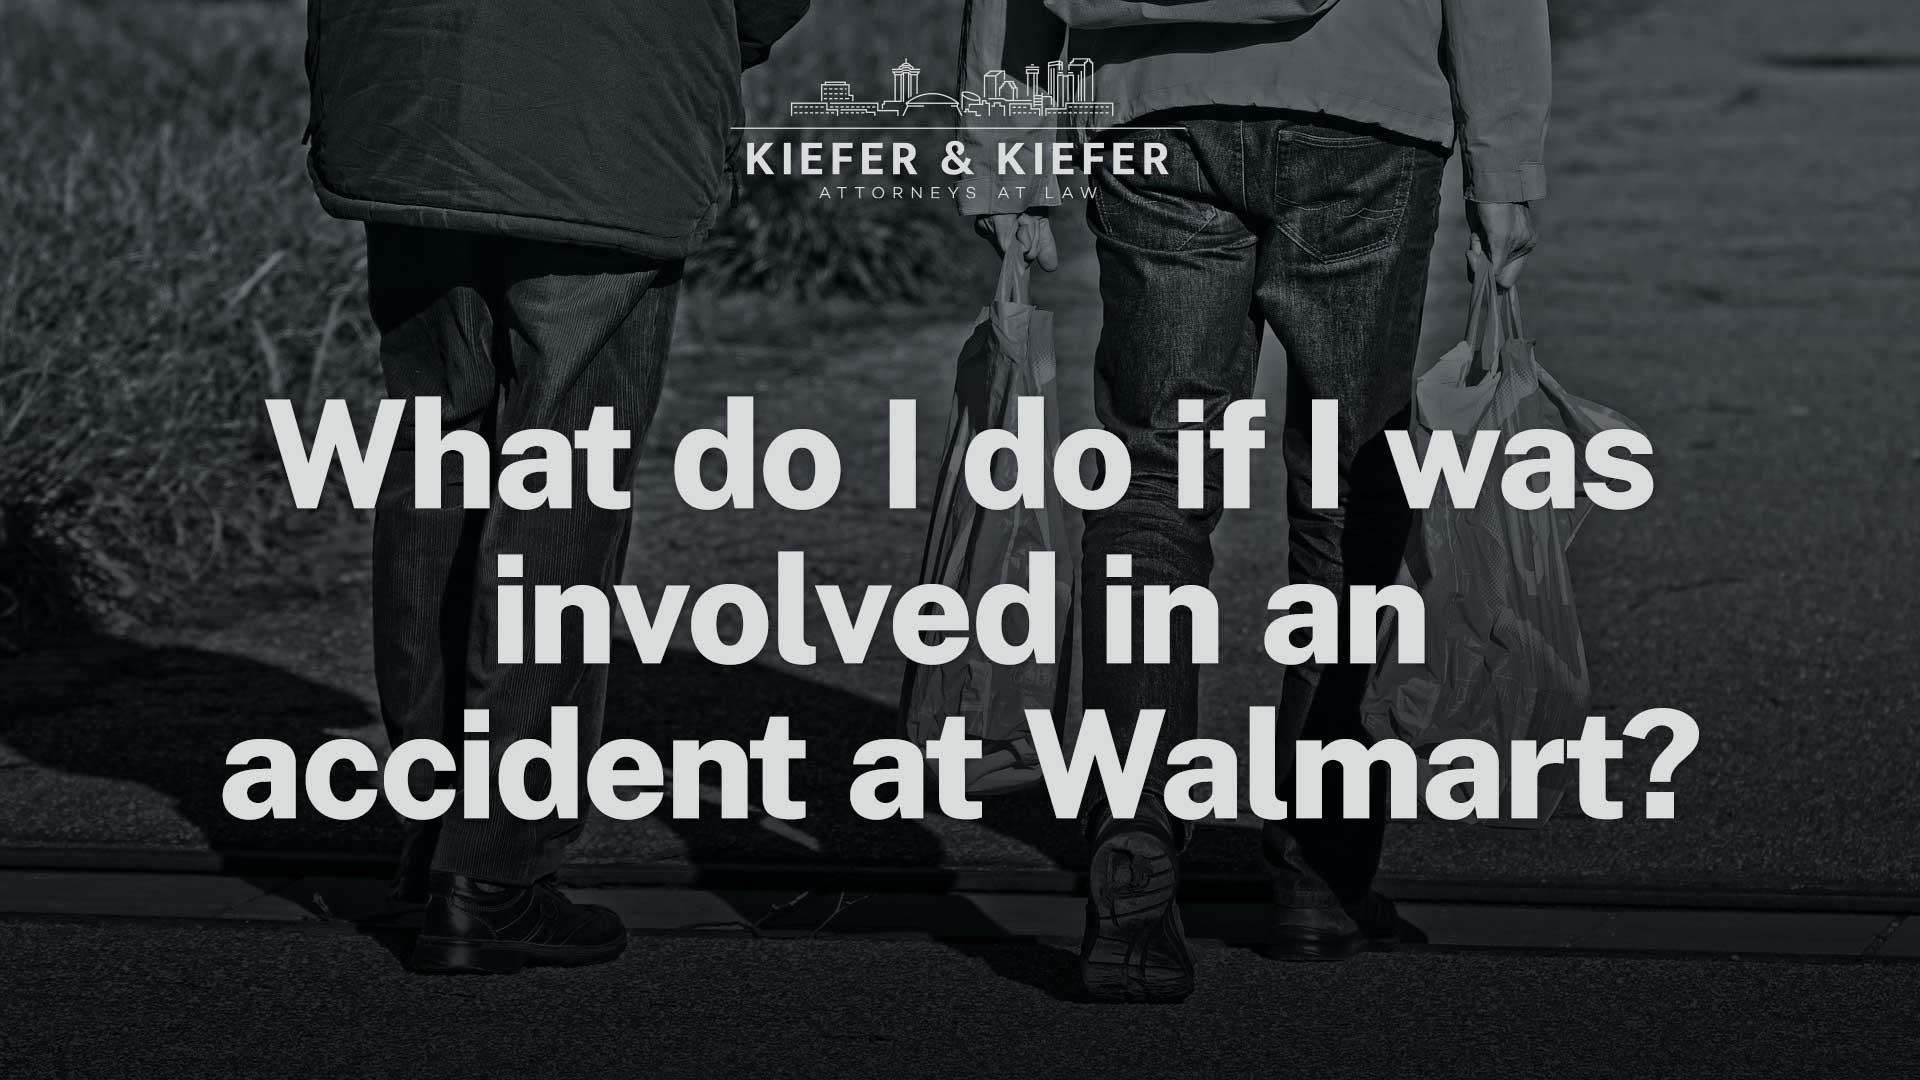 what do i do if im involved in an accident at walmart - kiefer kiefer new orleans injury attorneys